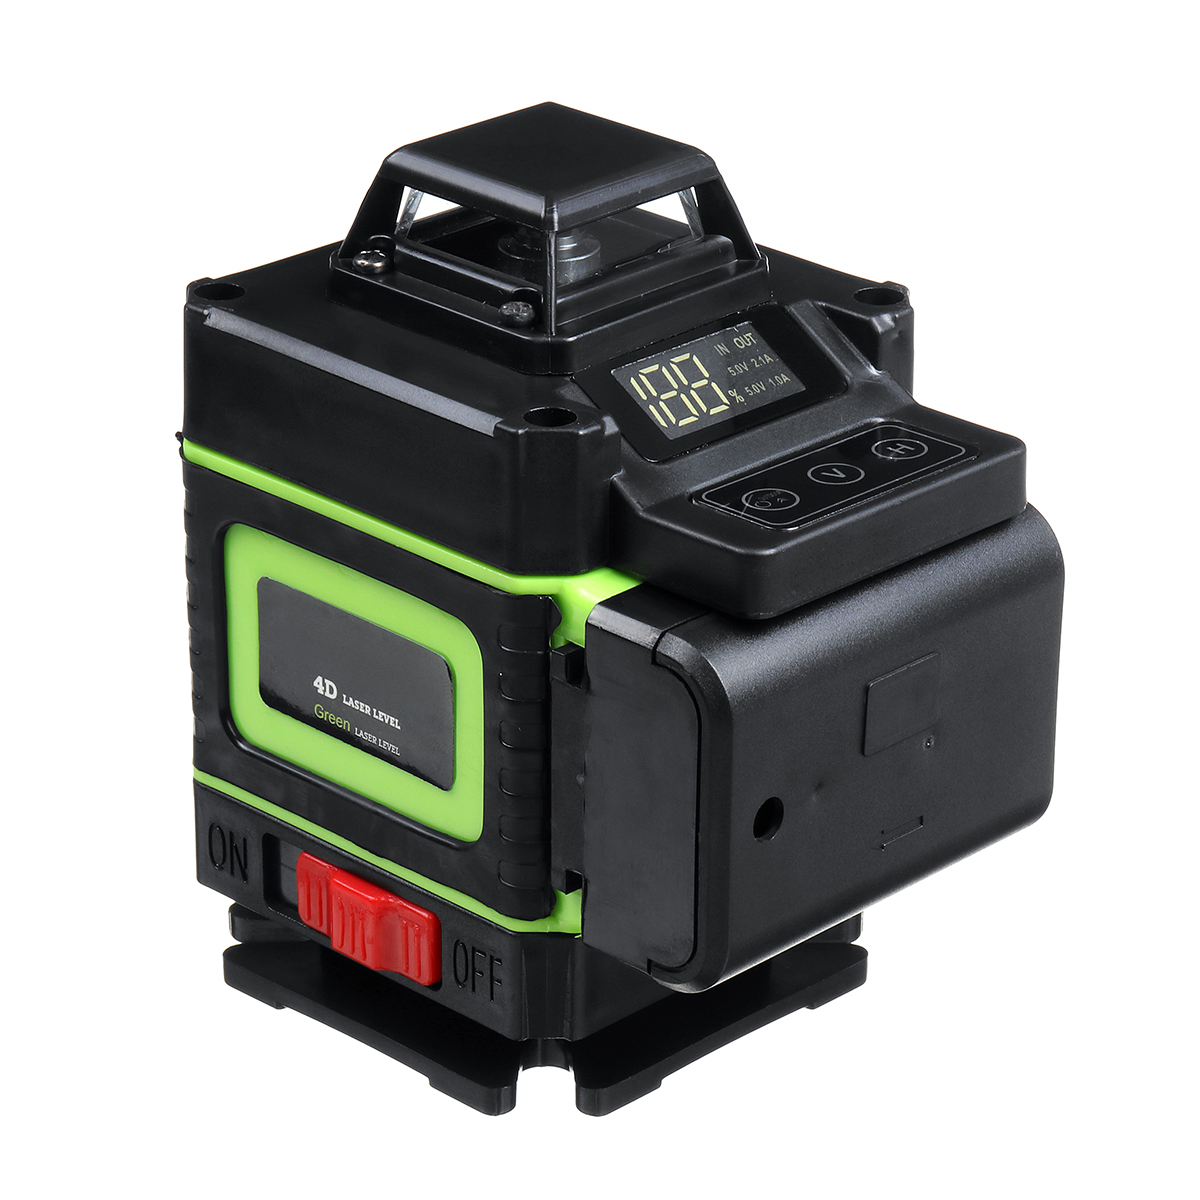 16-Line-Strong-Green-Light-3D-Remote-Control-Laser-Level-Measure-with-Wall-Attachment-Frame-1691974-7